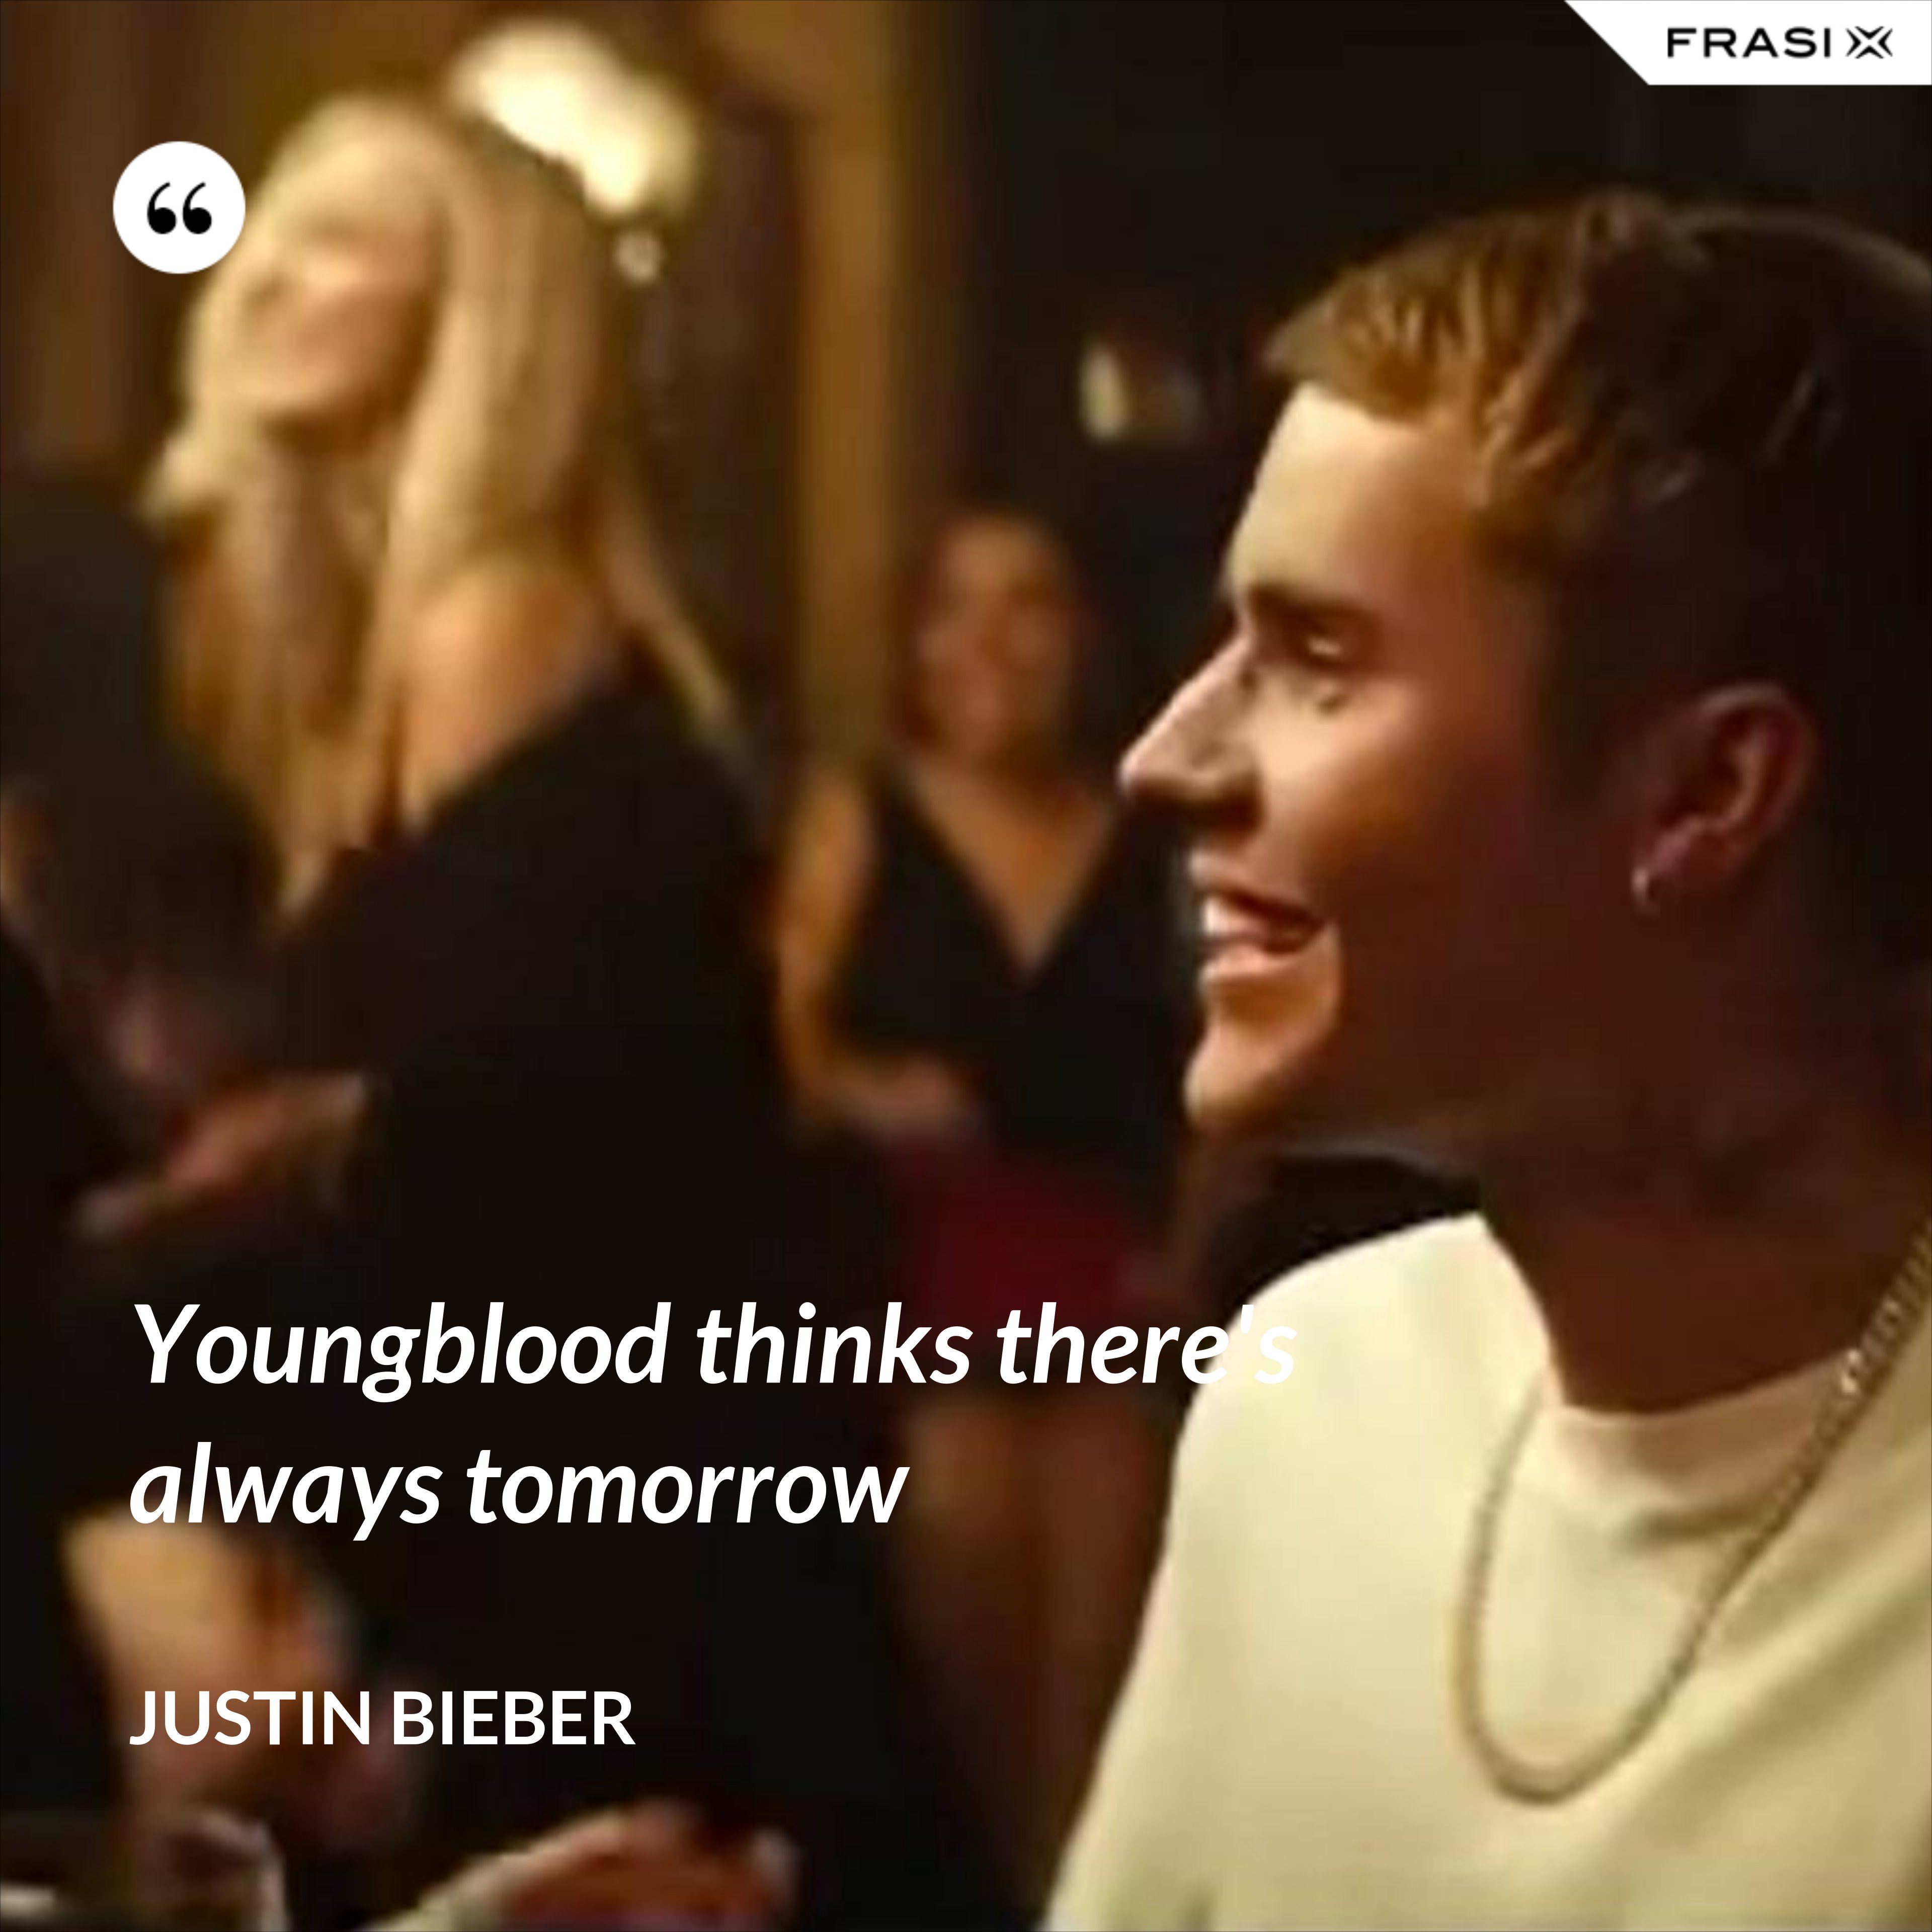 Youngblood thinks there's always tomorrow - Justin Bieber